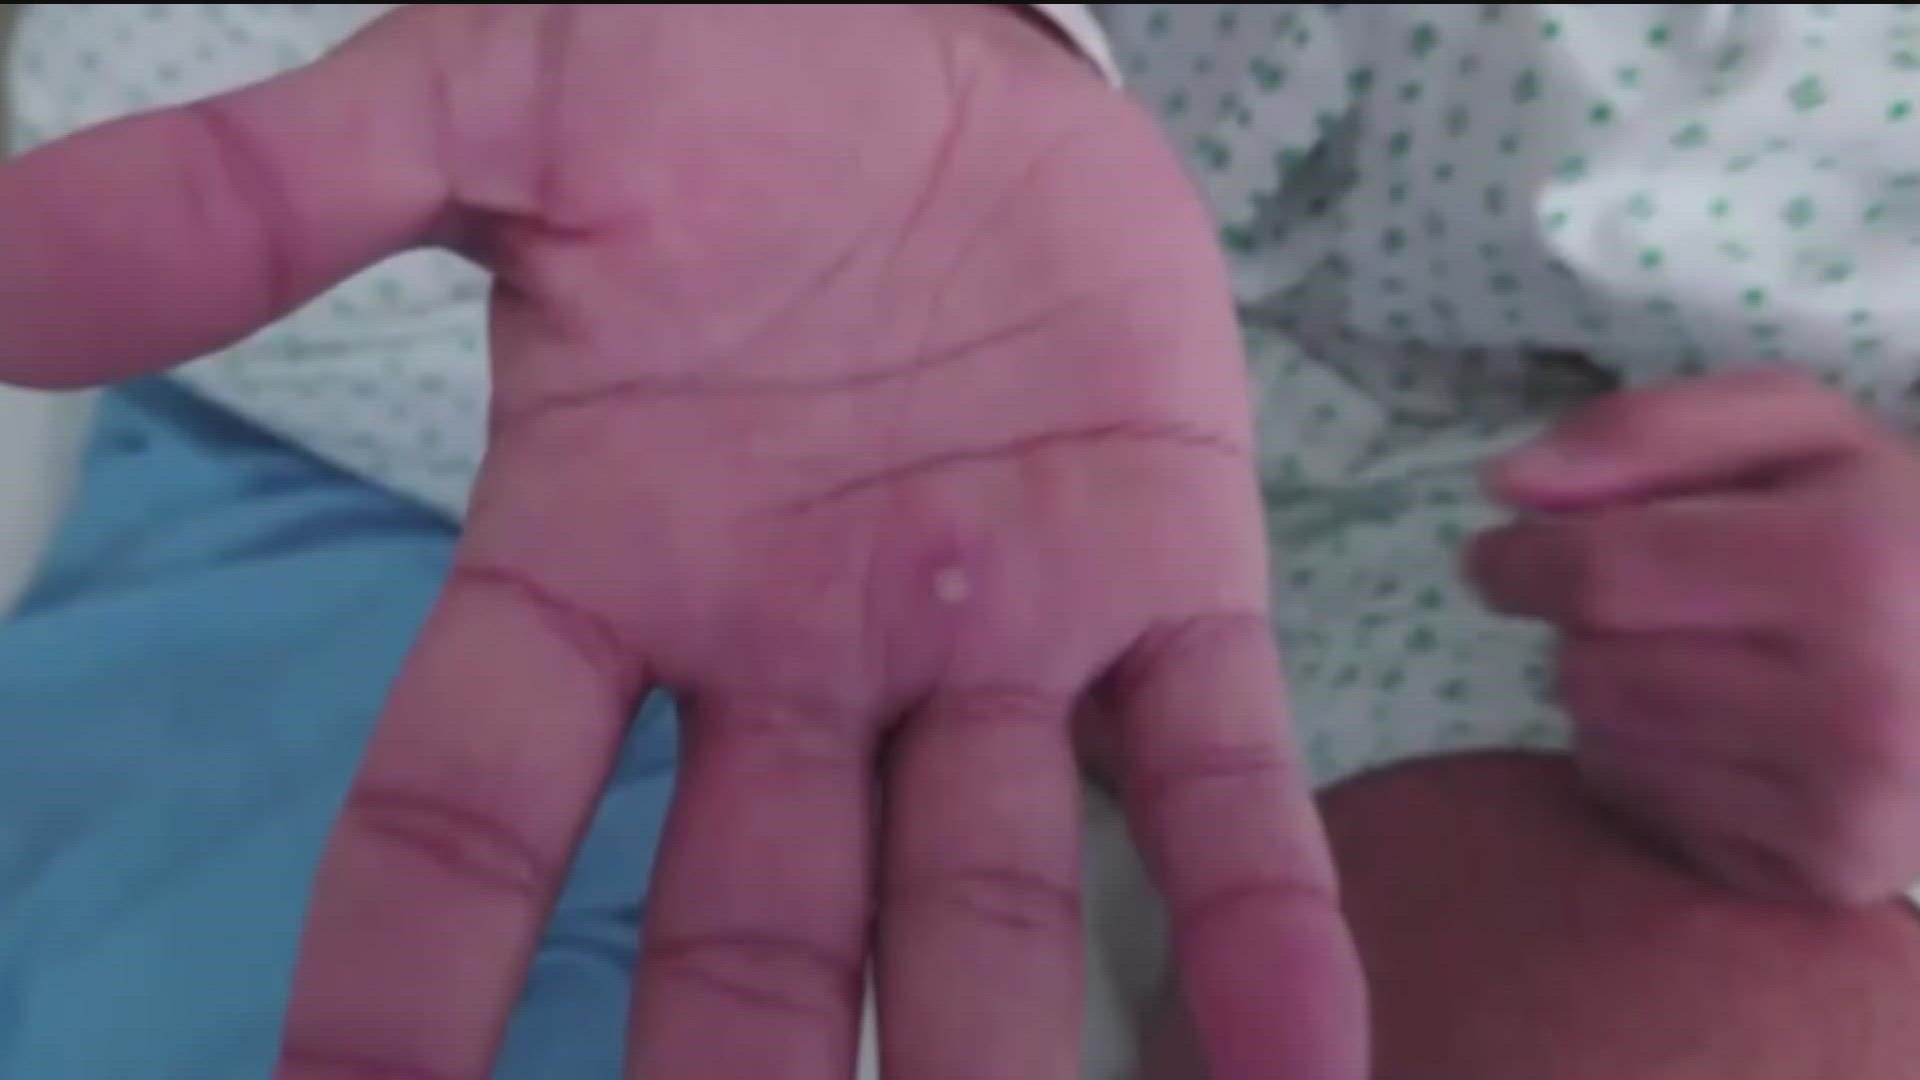 There are 27 confirmed monkeypox cases in San Diego county and another 19 listed as probable, according to county leaders.